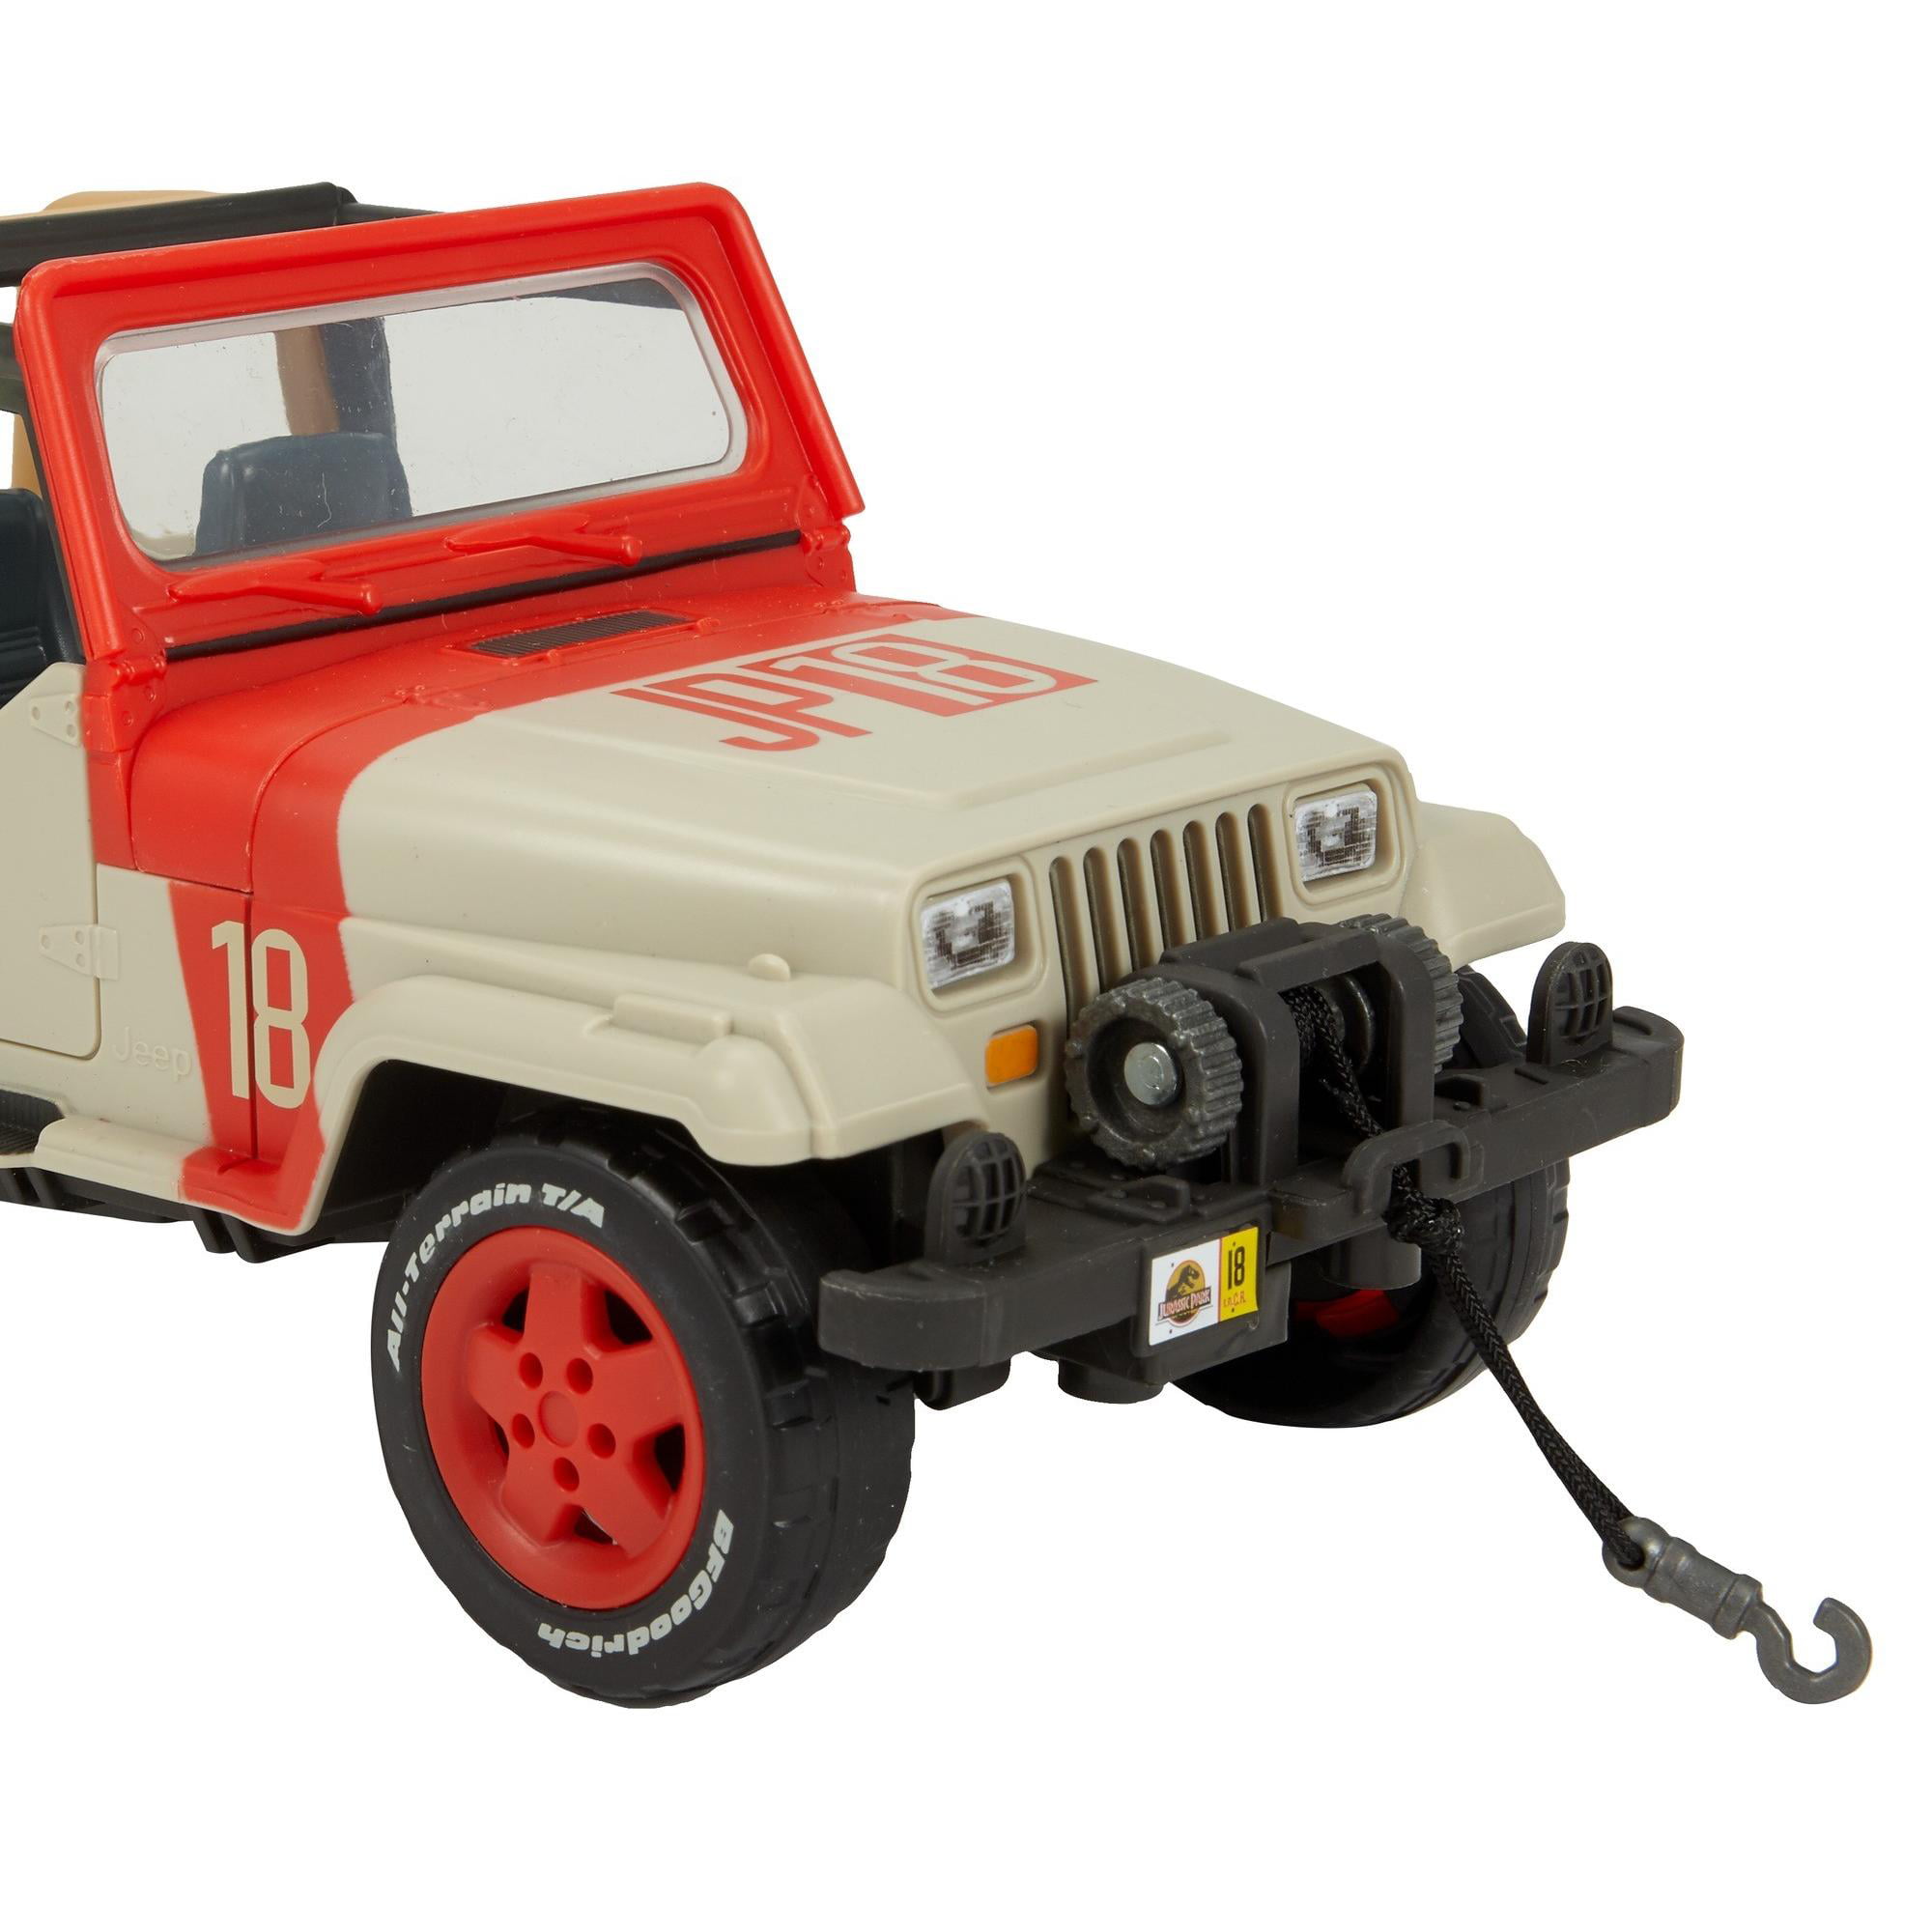 Jurassic World Legacy Collection Jeep Wrangler Toy for sale online Matchbox